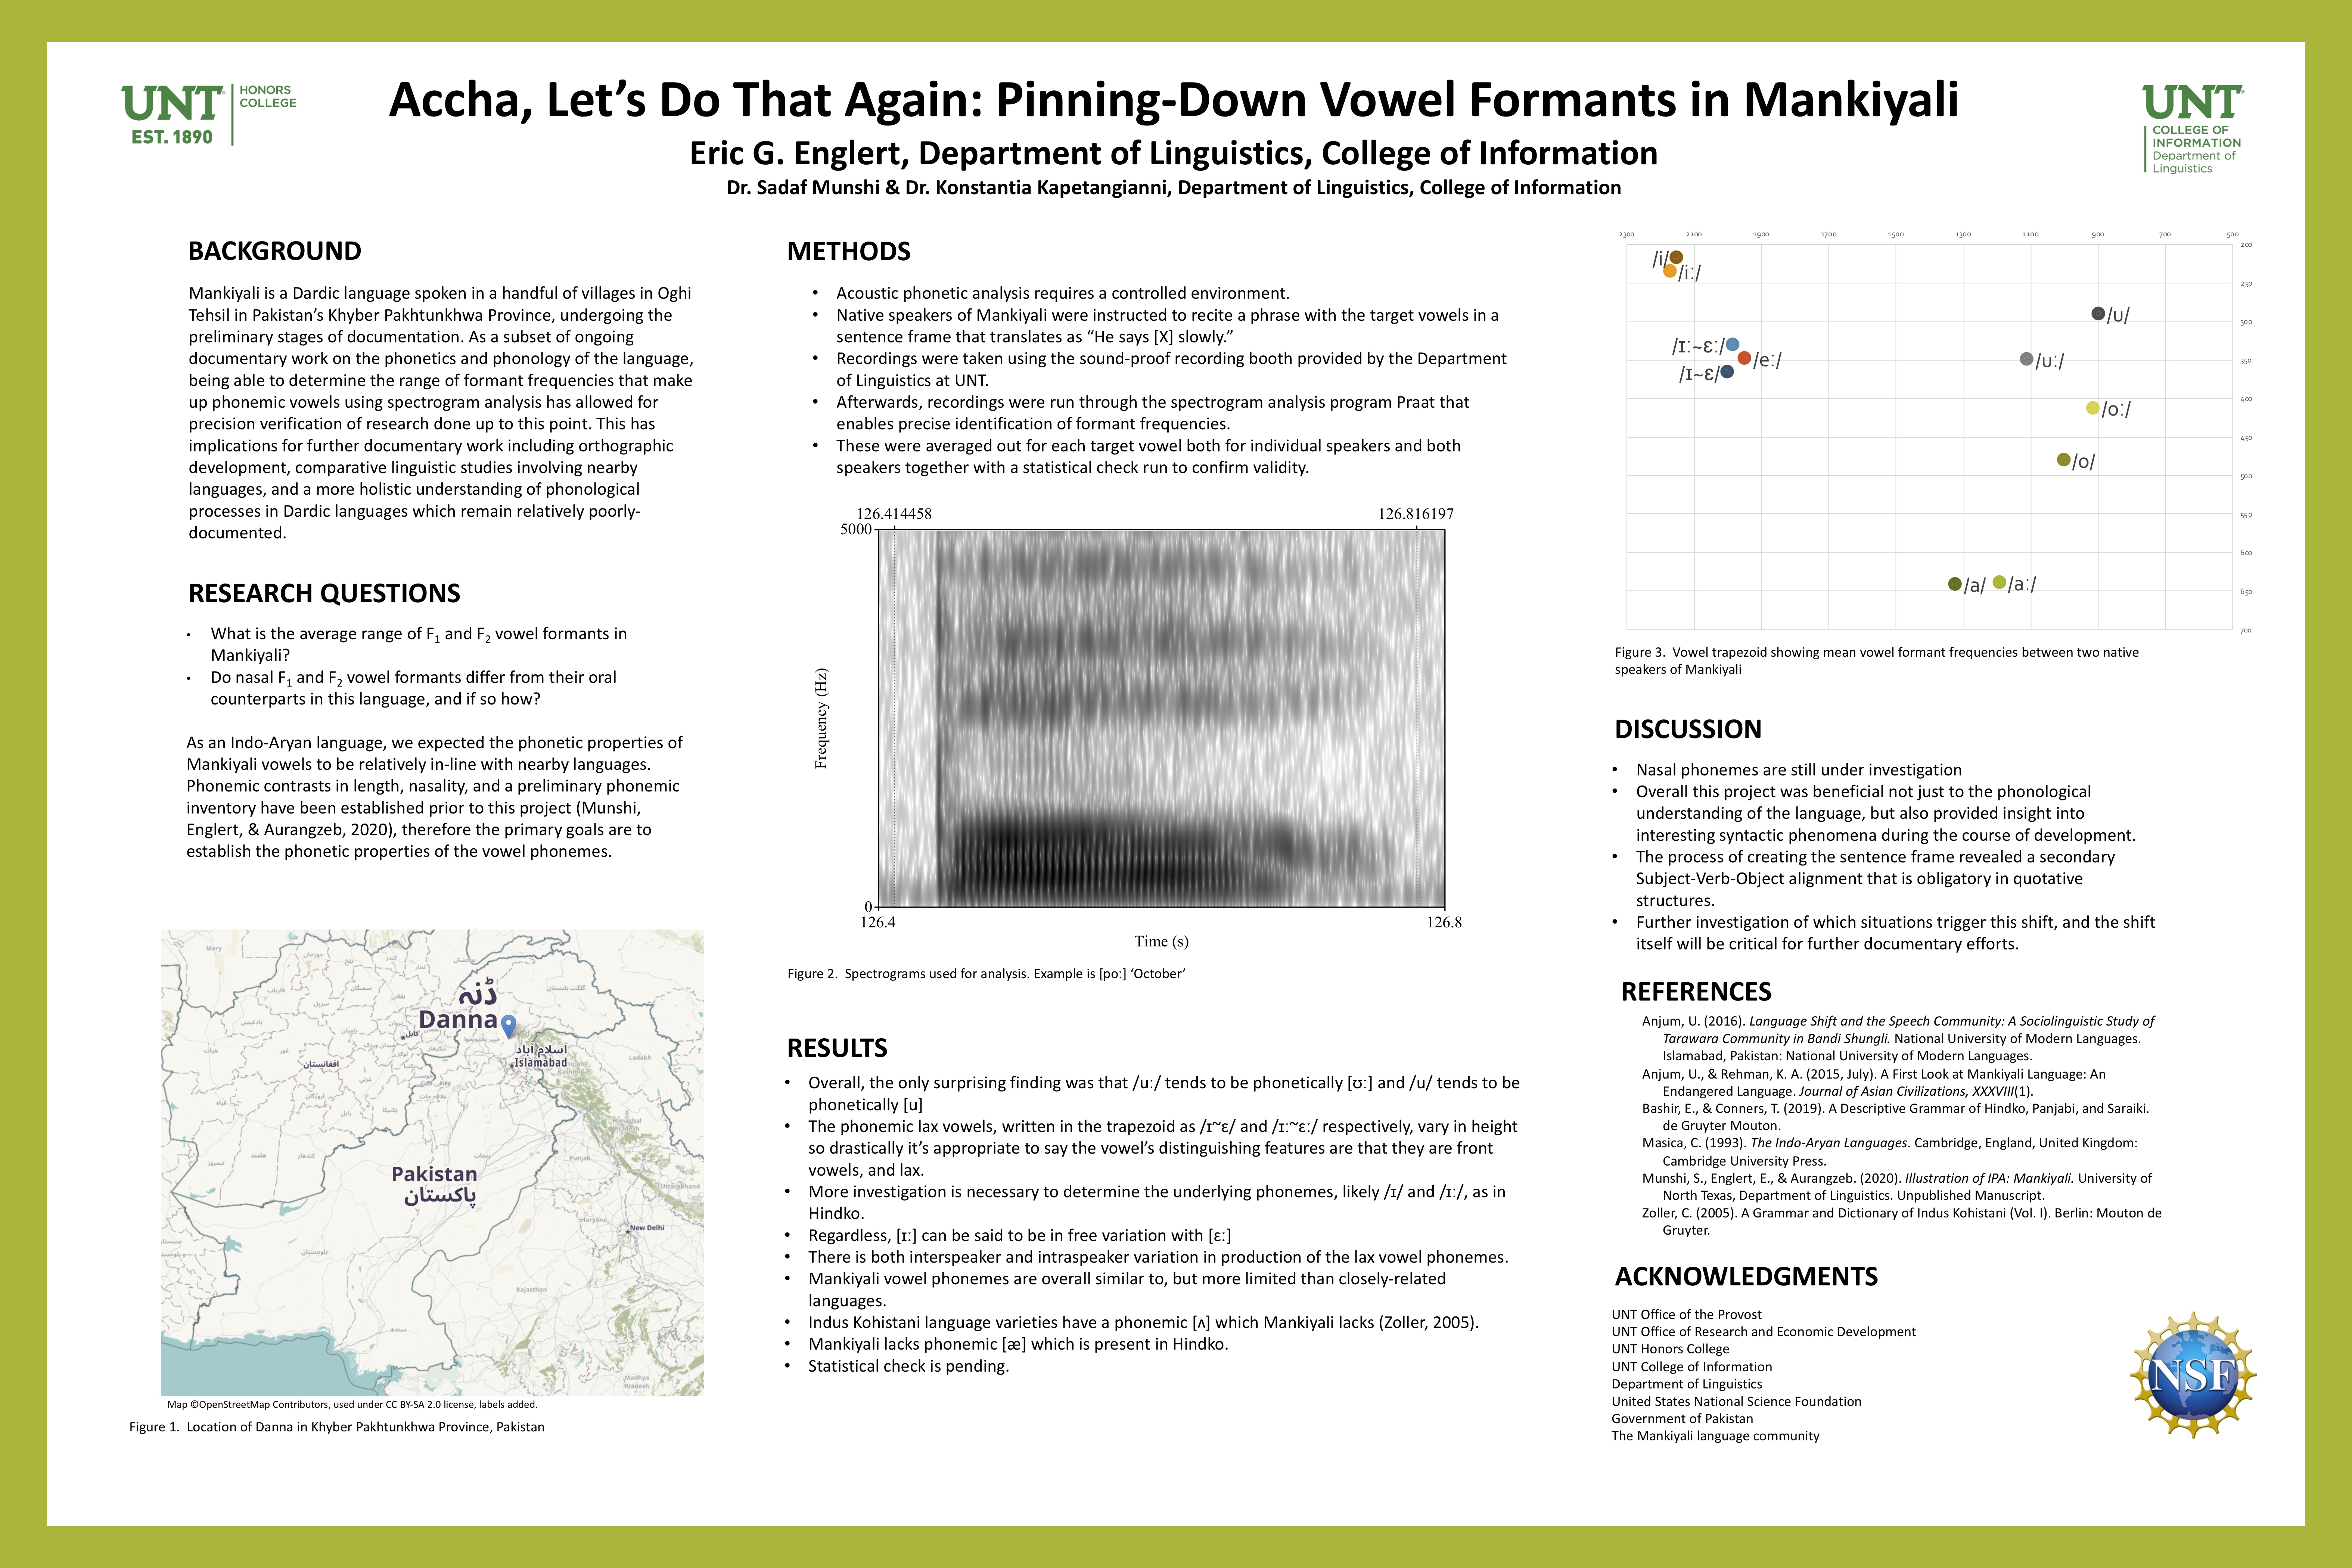 Accha, Let’s Do That Again: Pinning-Down Vowel Formants in Mankiyali